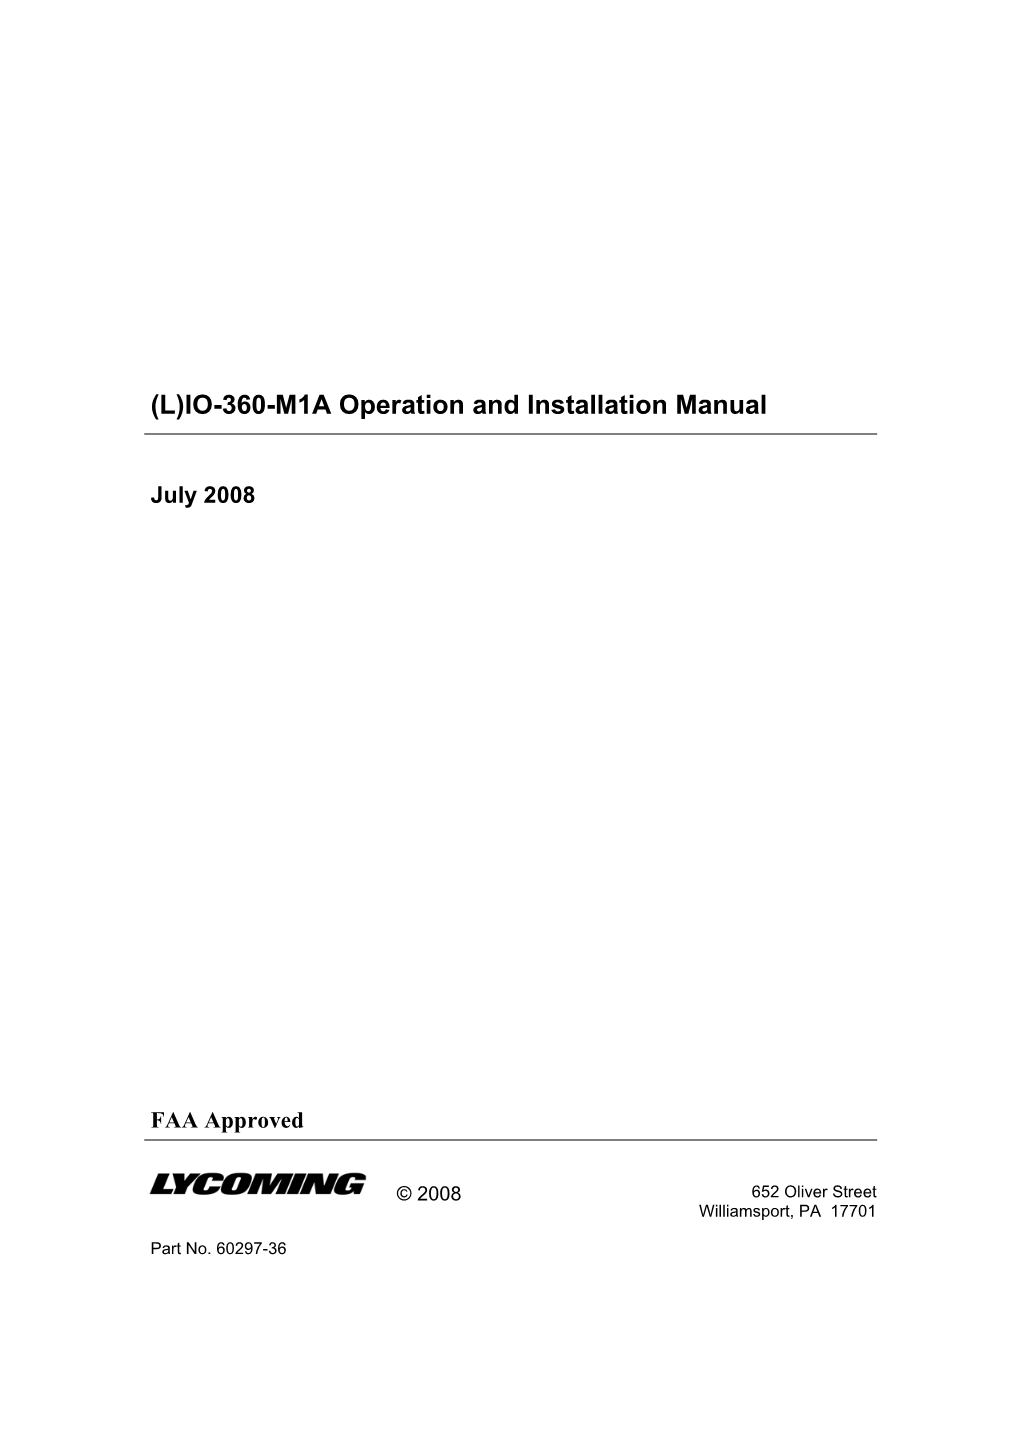 IO-360-M1A Operation and Installation Manual